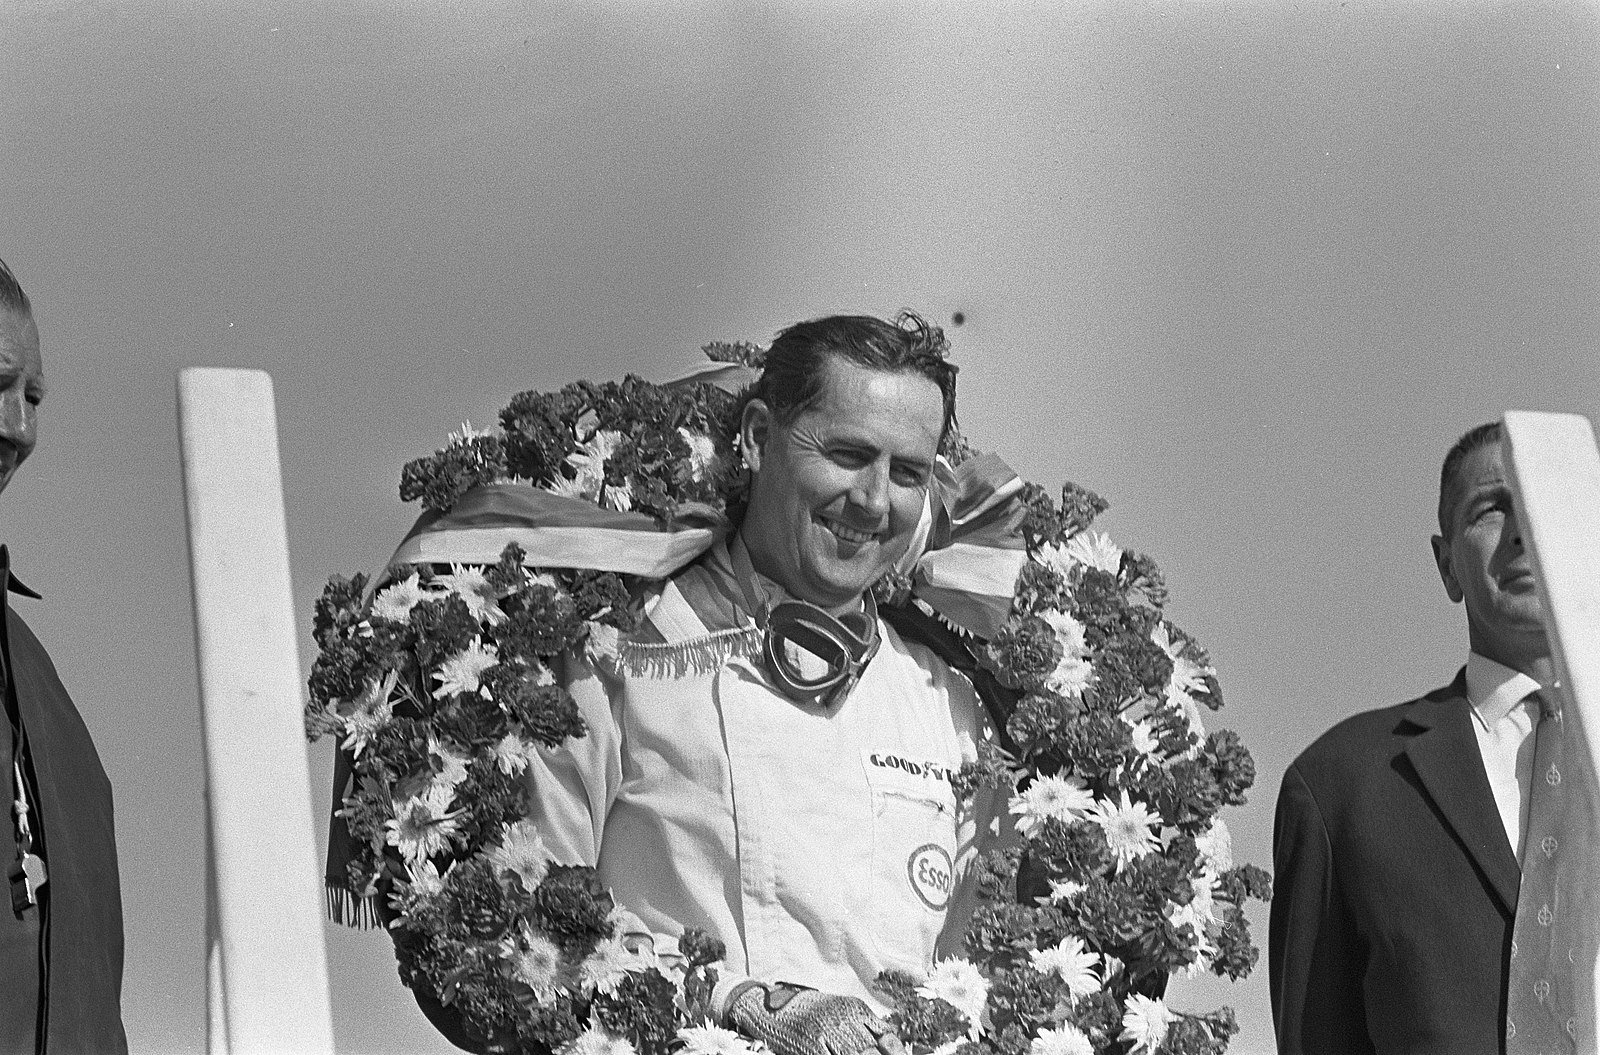 Jack Brabham: The Singular Triumph of Winning a Title with His Own Car